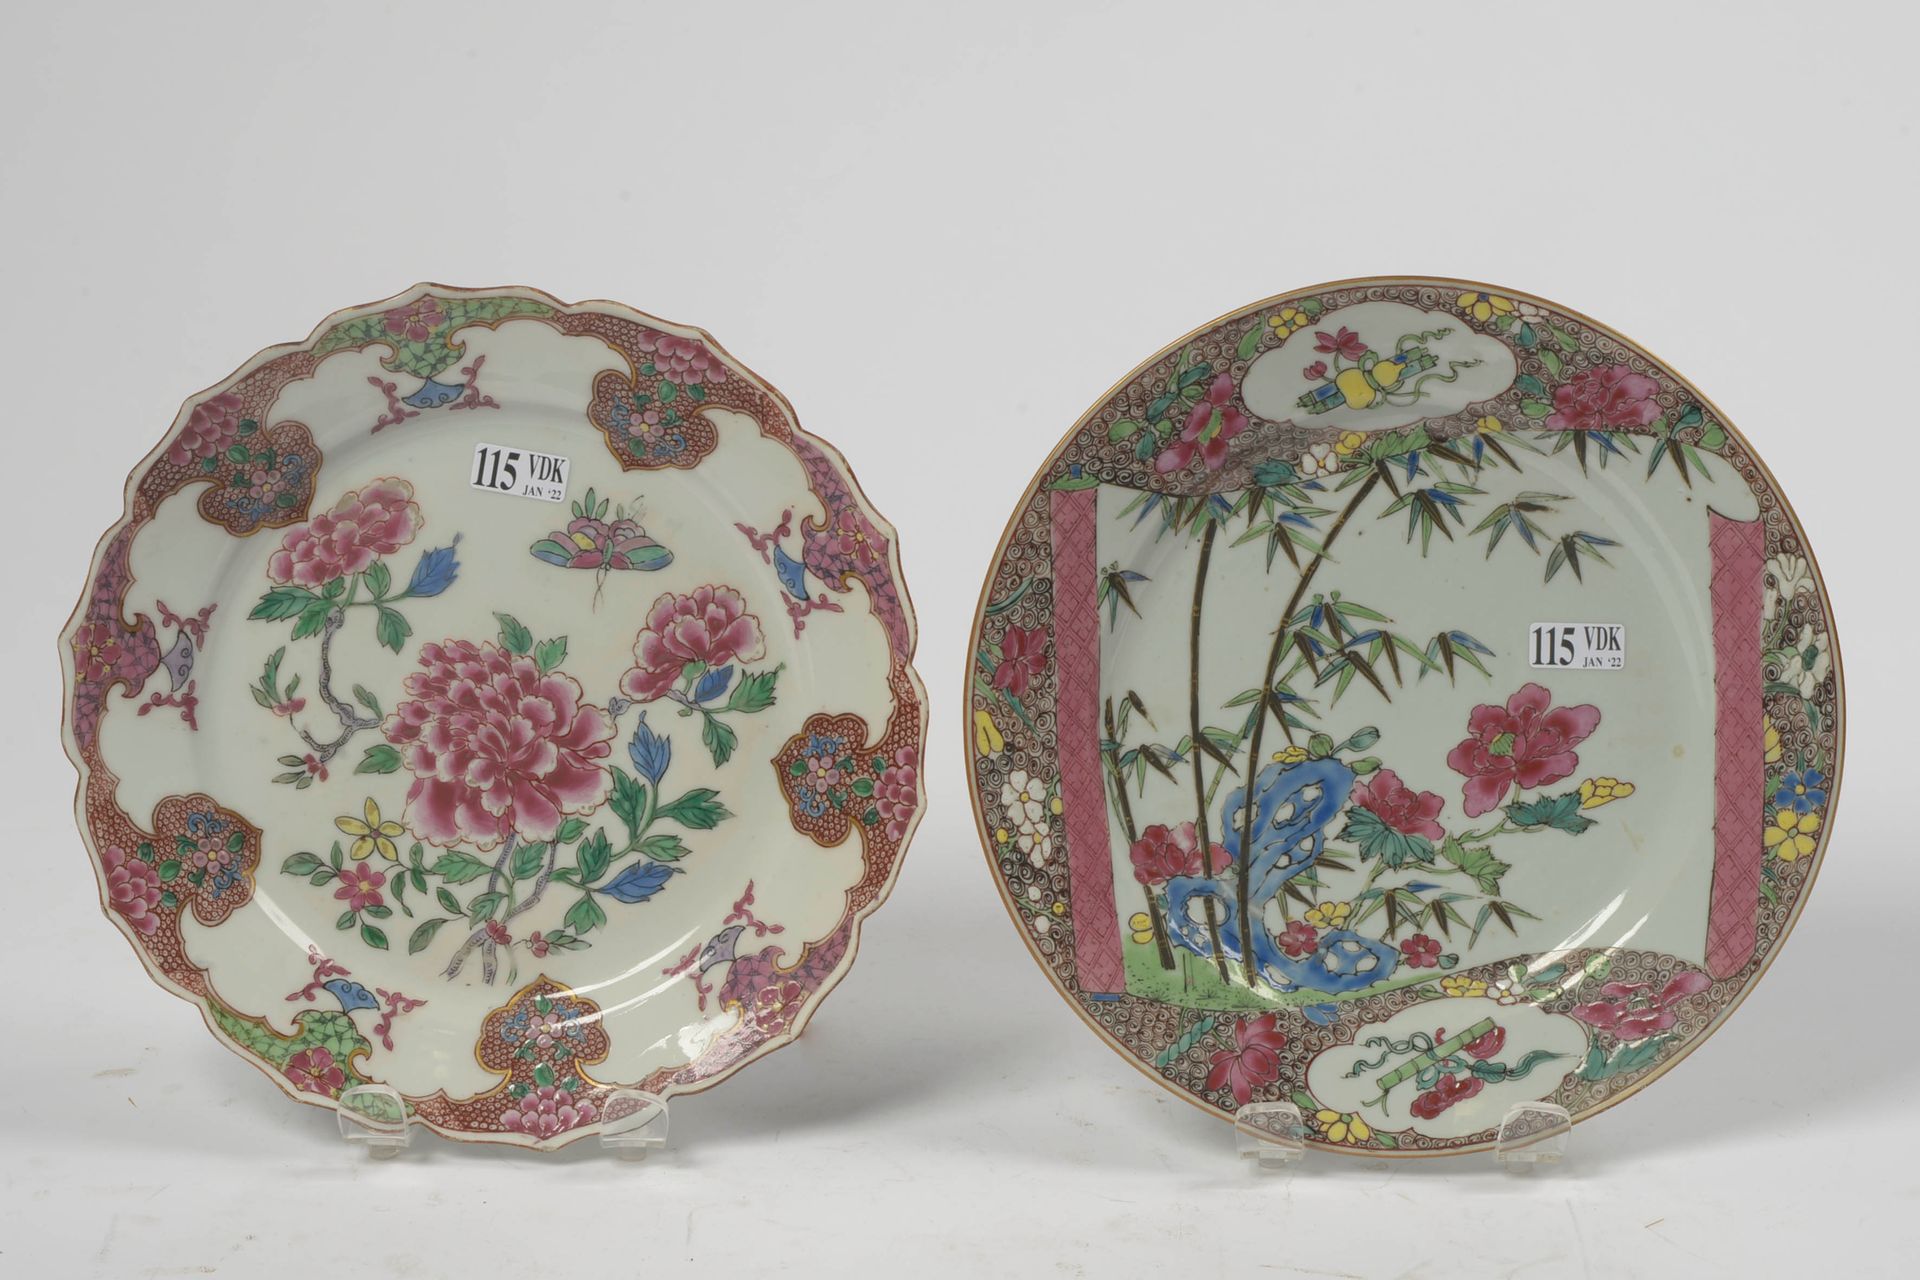 Null Set of two Chinese polychrome porcelain plates called "Famille rose" compri&hellip;